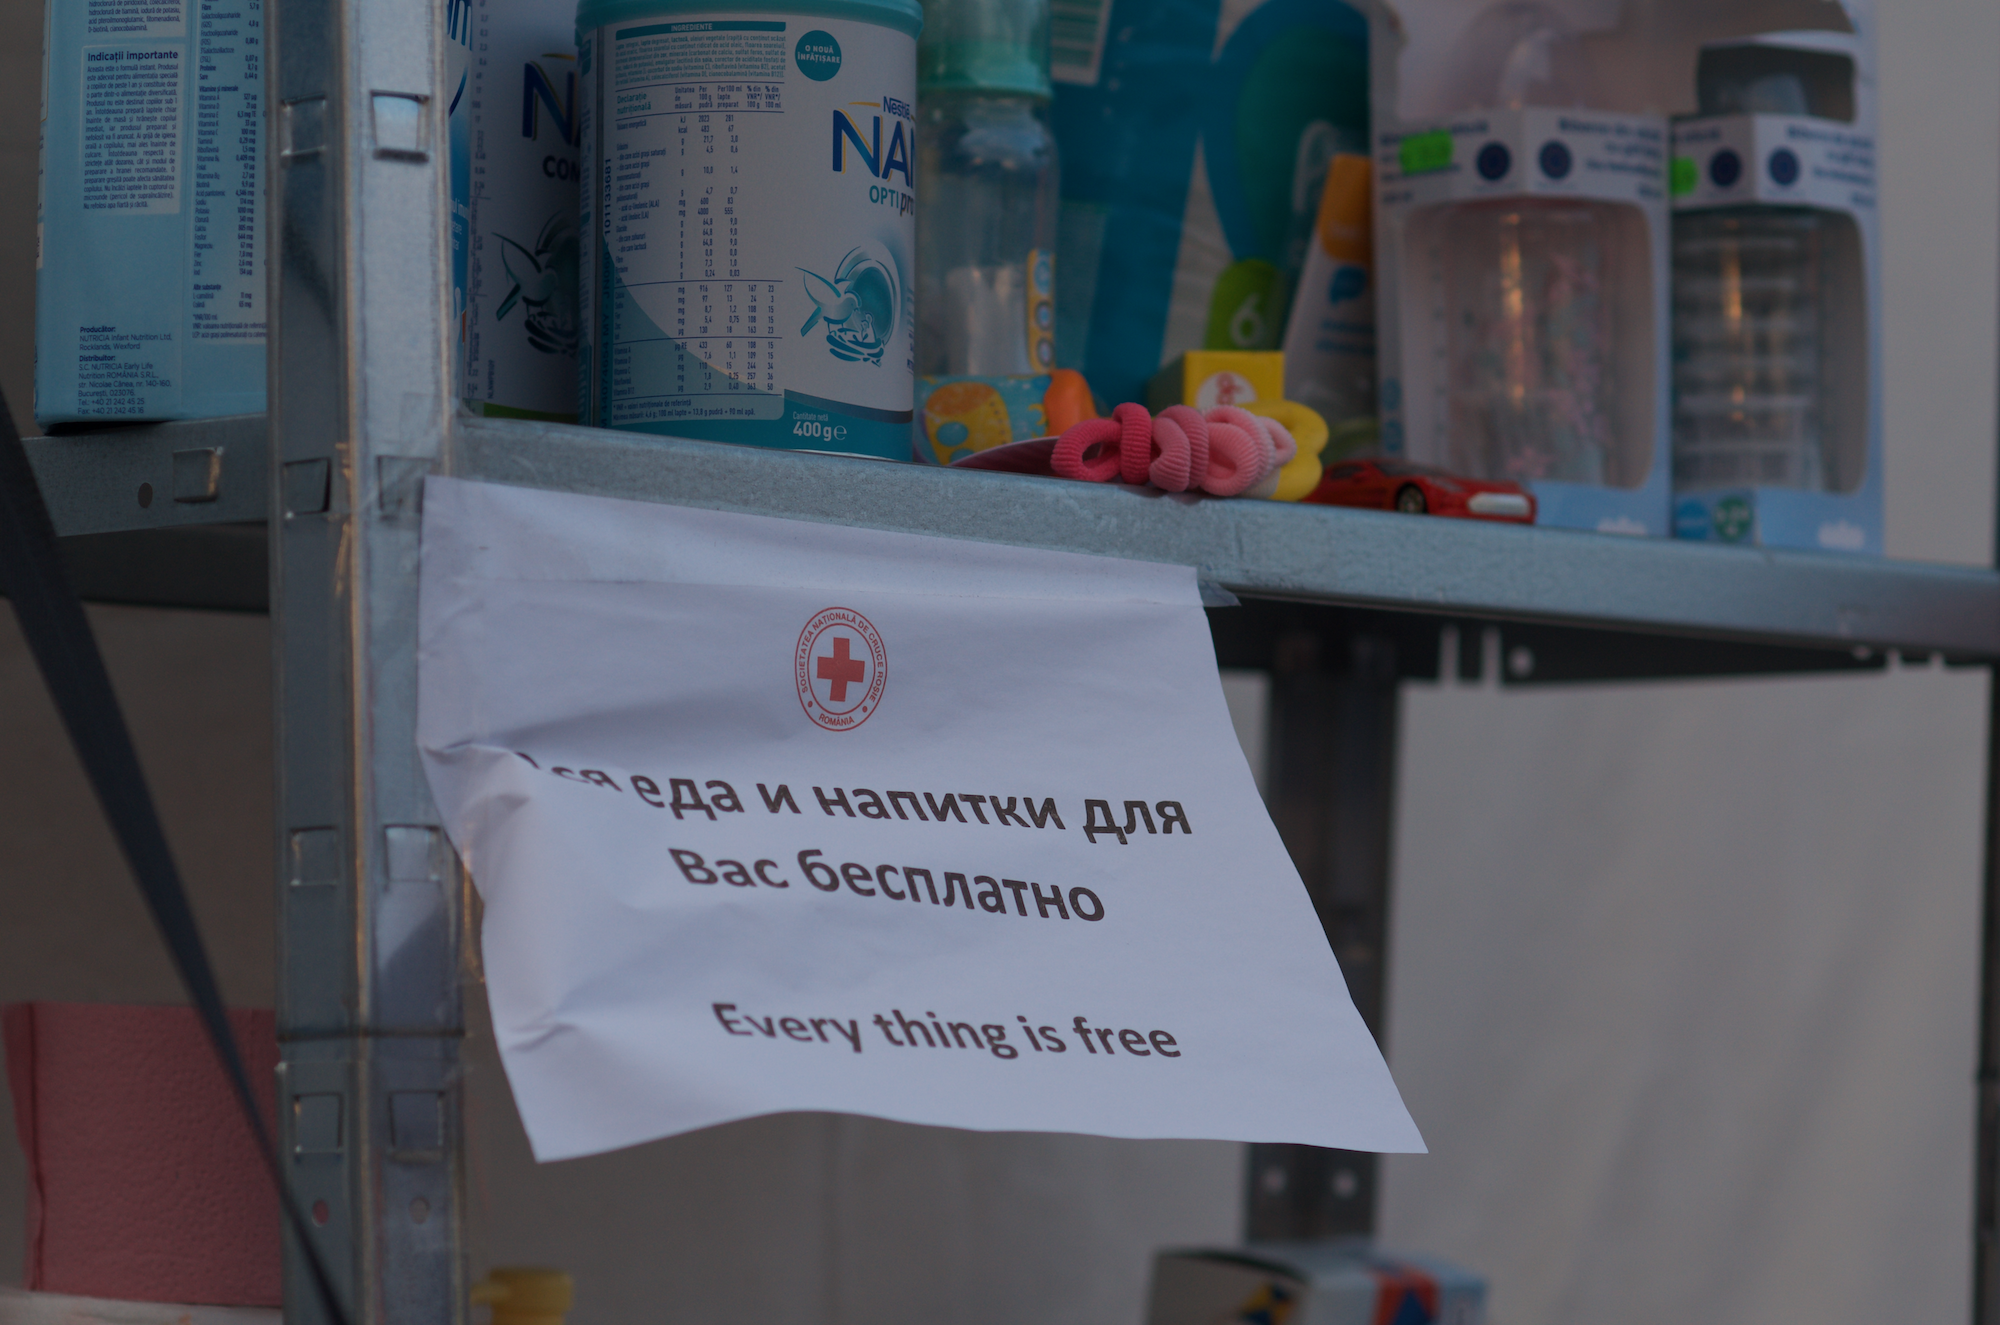 The Red Cross tent at Isaccea provides people with free items such as baby milk, bottles, blankets, tampons and pads, food and water